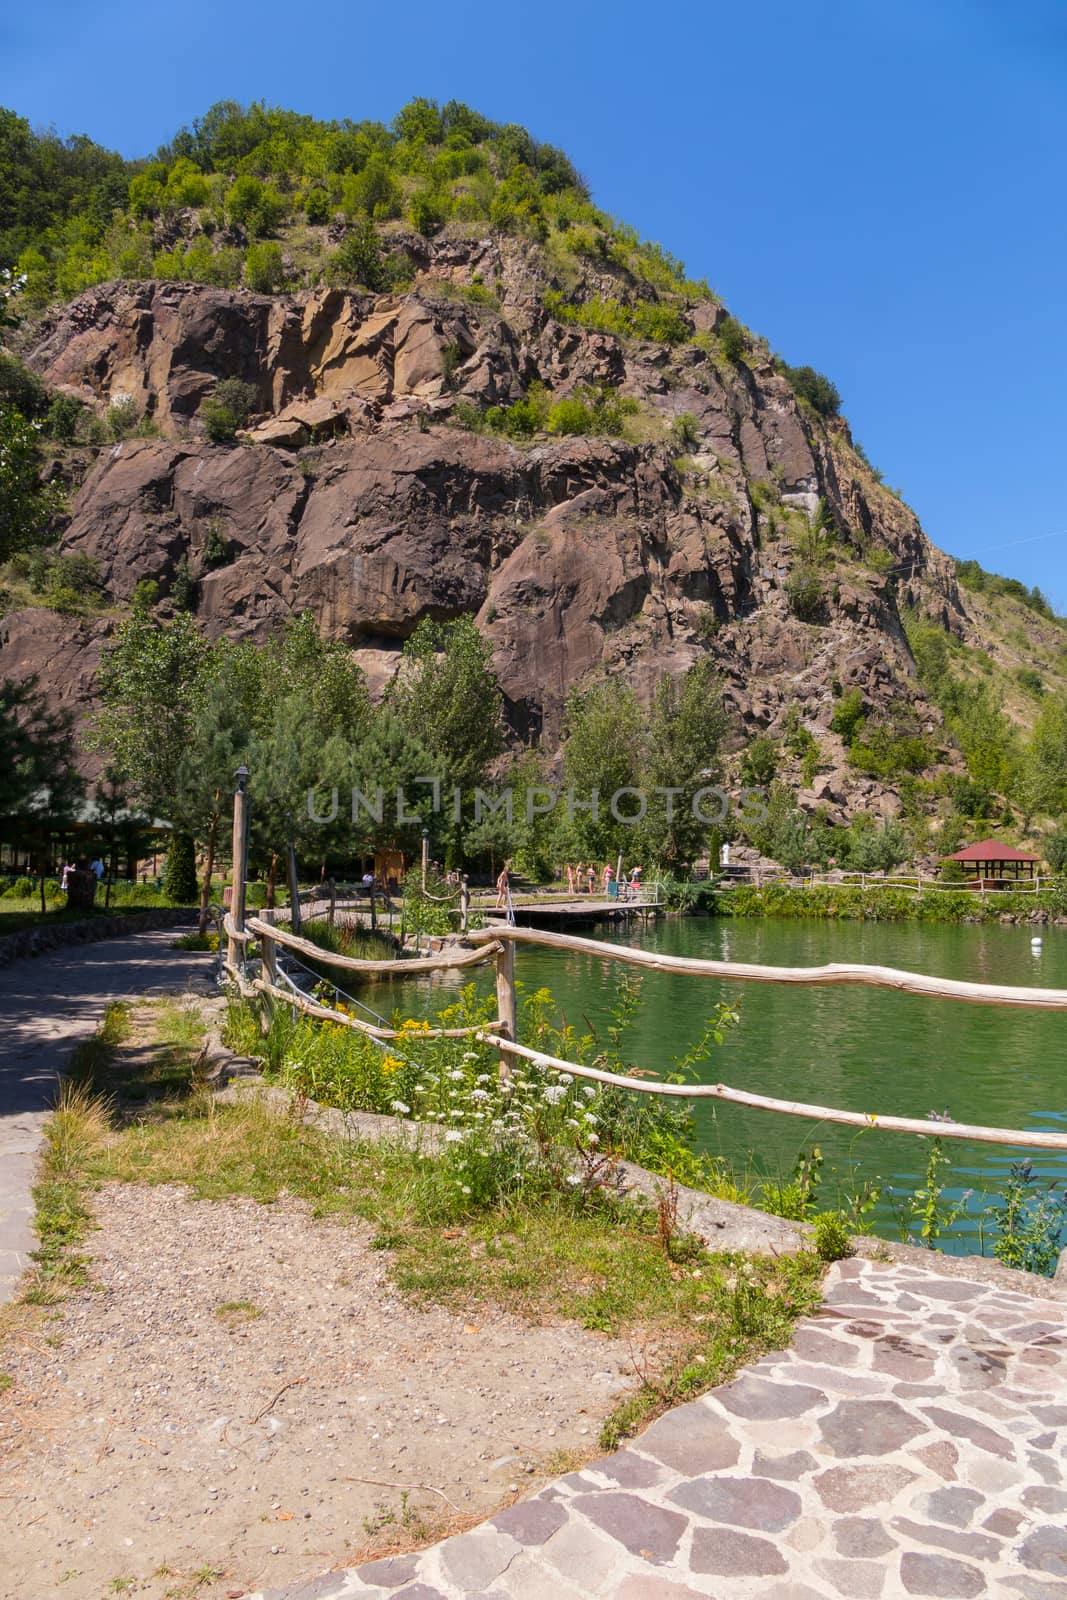 Lake with a gazebo on the shore at the foot of a tall rock on a blue clear sky background by Adamchuk